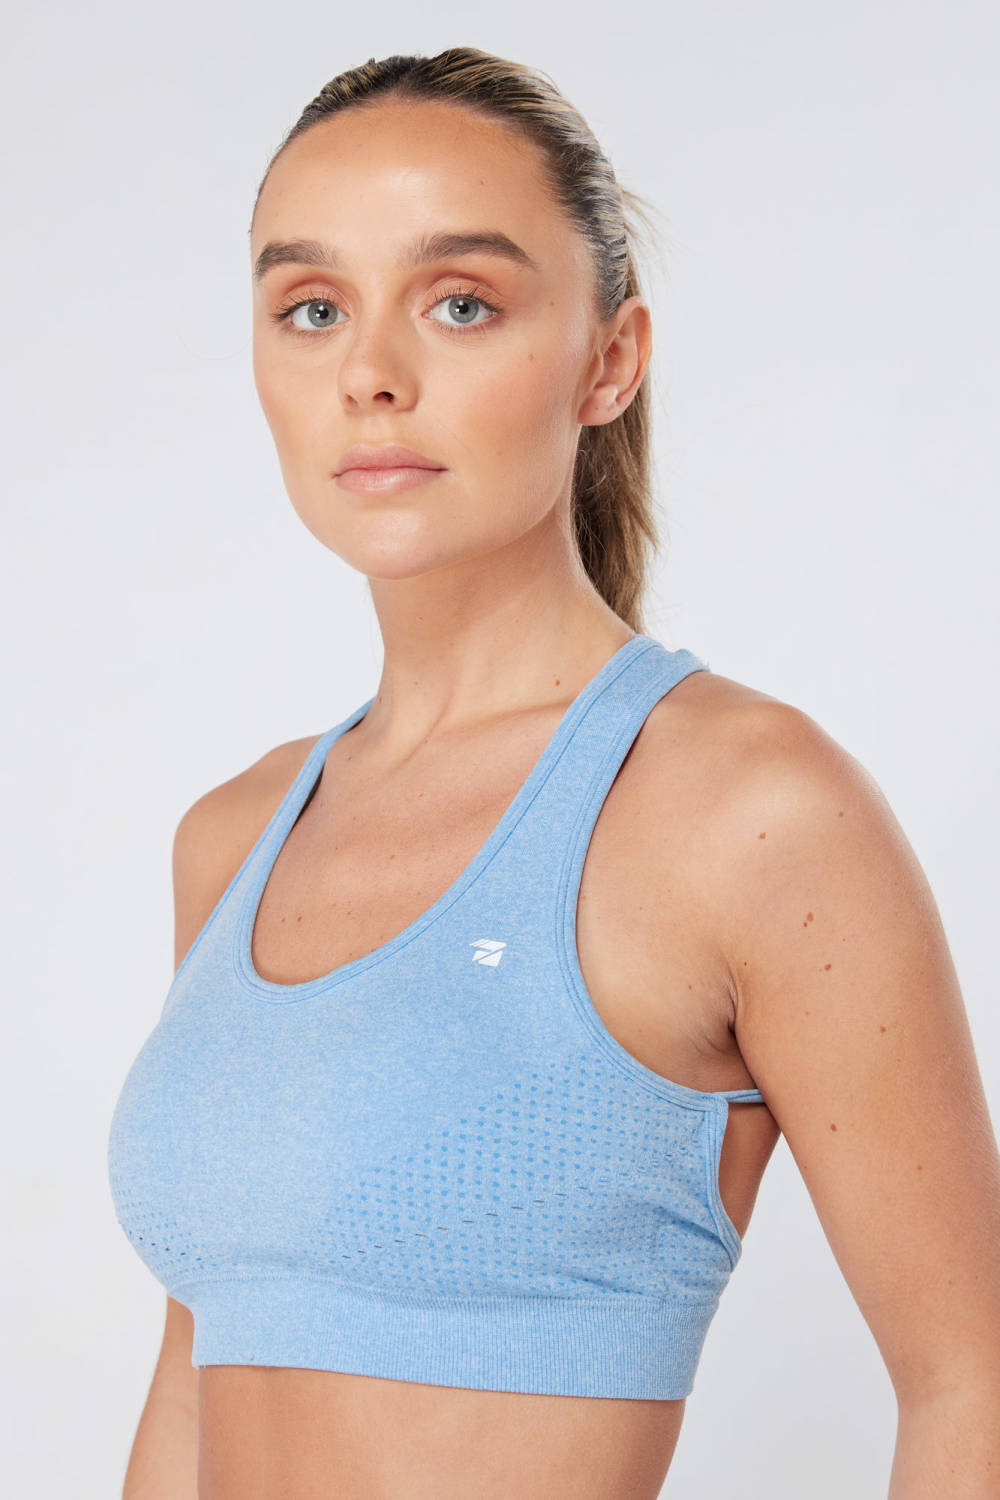 Twill Active - Recycled Colour Block Body Fit Seamless Sports Bra - Stone -  Reitmans